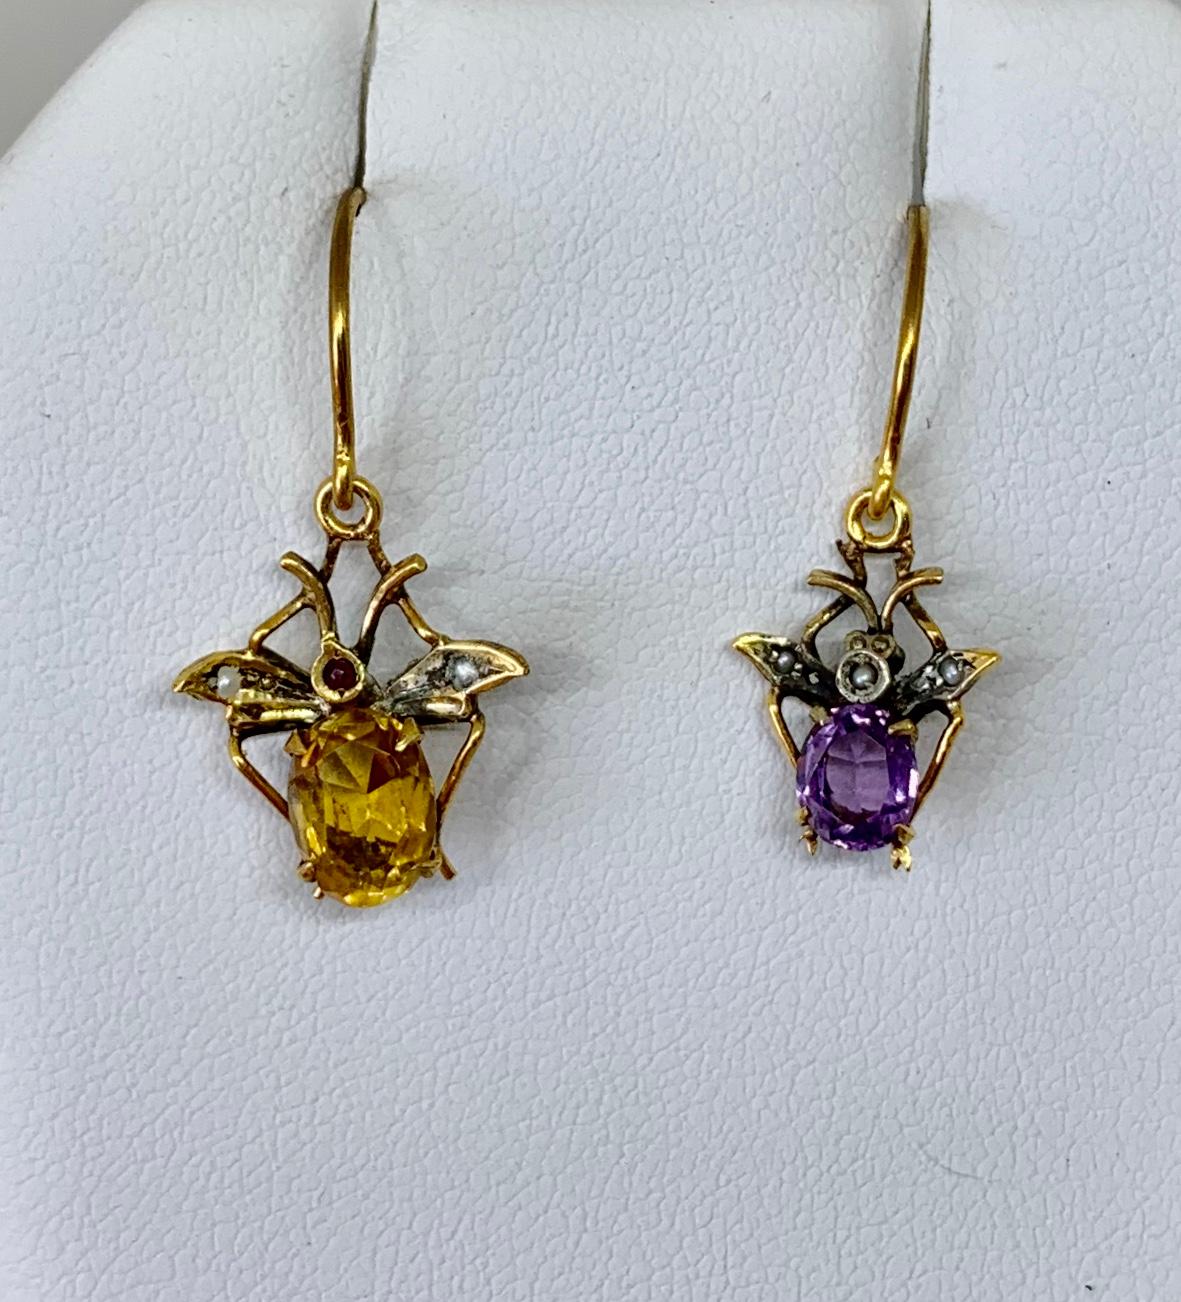 This is a wonderful pair of rare antique Fly Insect Earrings in Gold with gorgeous Citrine and Amethyst gems with 
Pearl accents.  The Victorian - Edwardian jewels are beautifully made with an oval faceted Amethyst and oval faceted Citrine making up